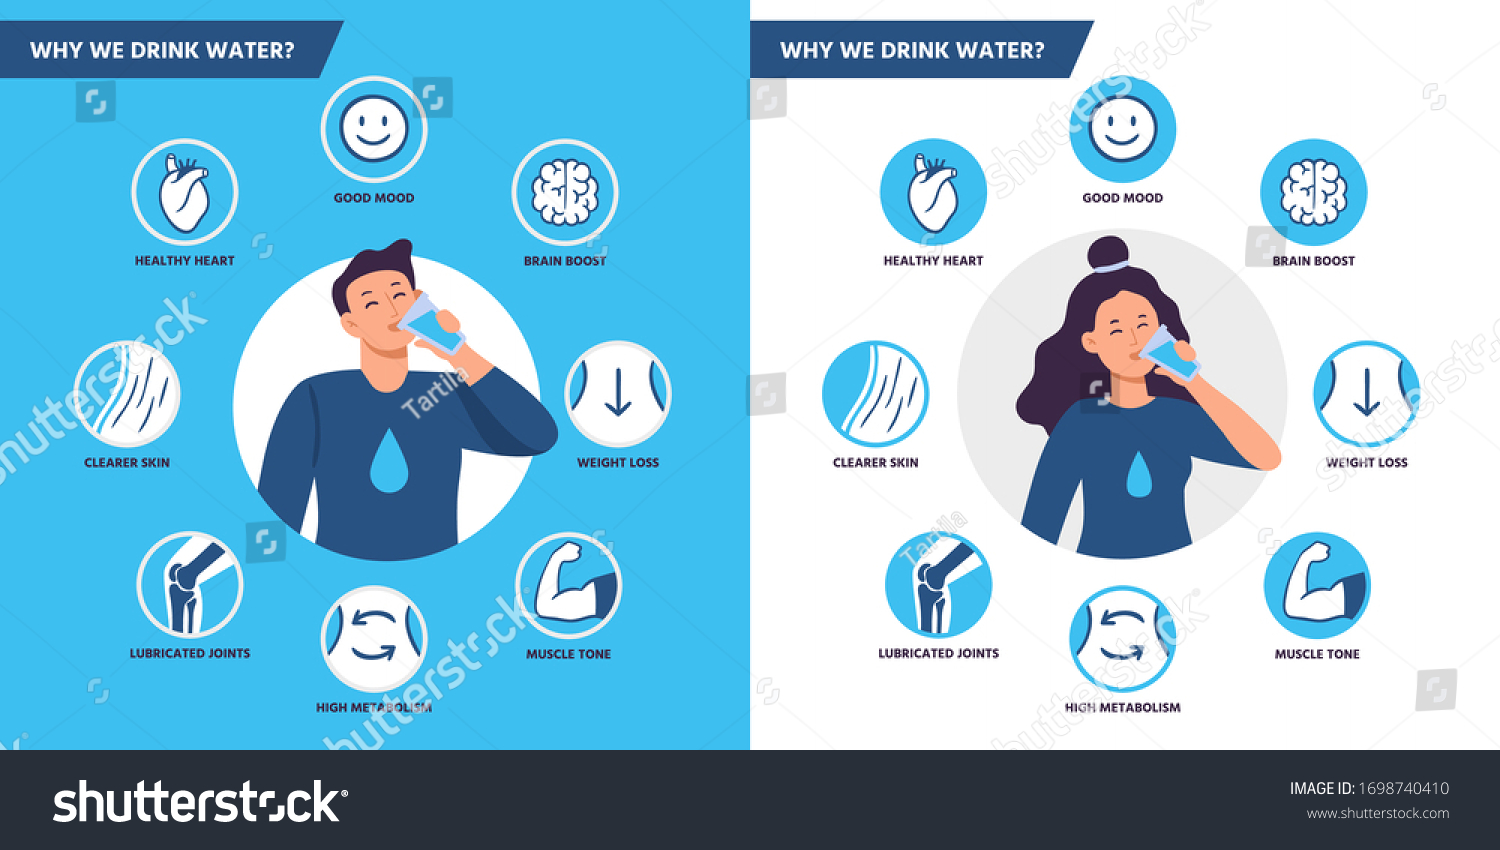 Drinking water benefits. Healthy human body hydration, man and woman drink water vector illustration set. Healthcare drink infographic, lubricated joints and muscle tone #1698740410